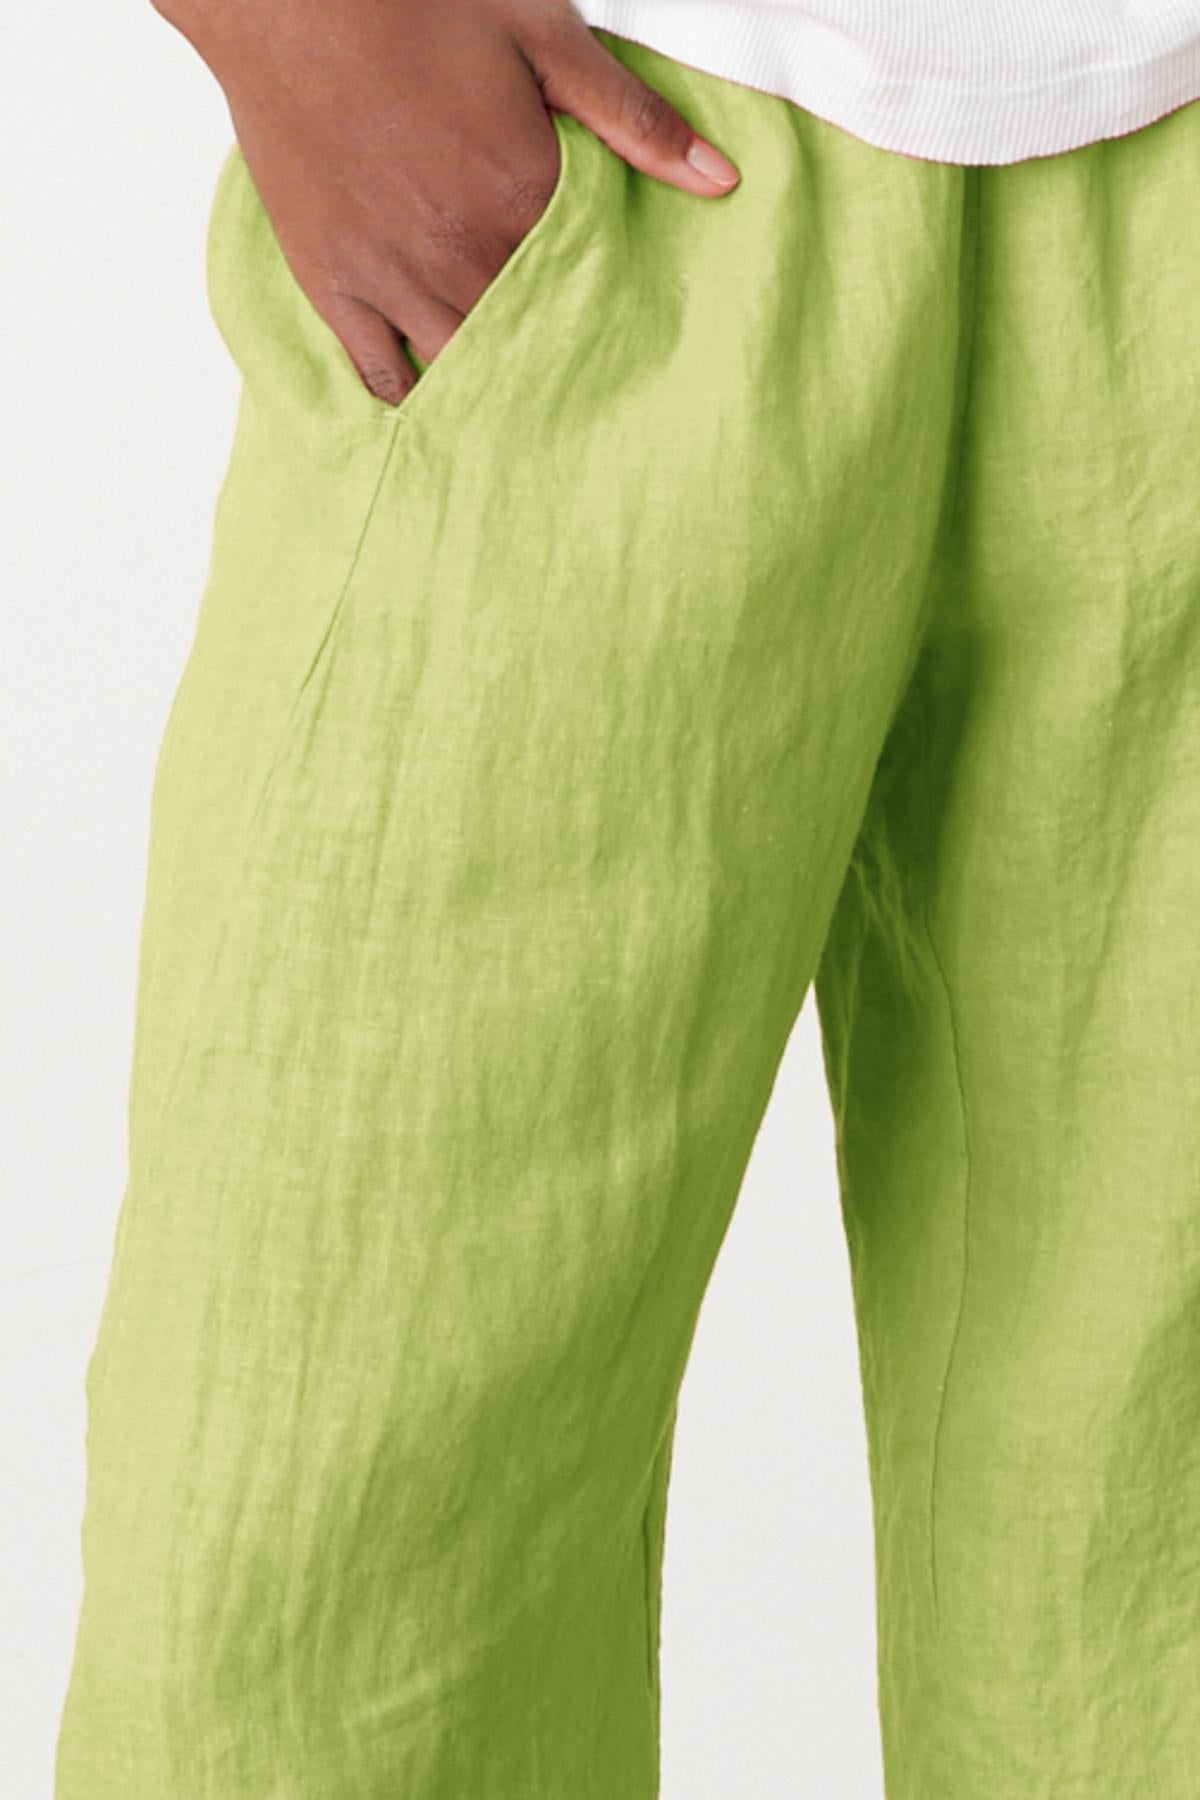   Lola pant in kiwi green colored linen close up front and pocket detail 